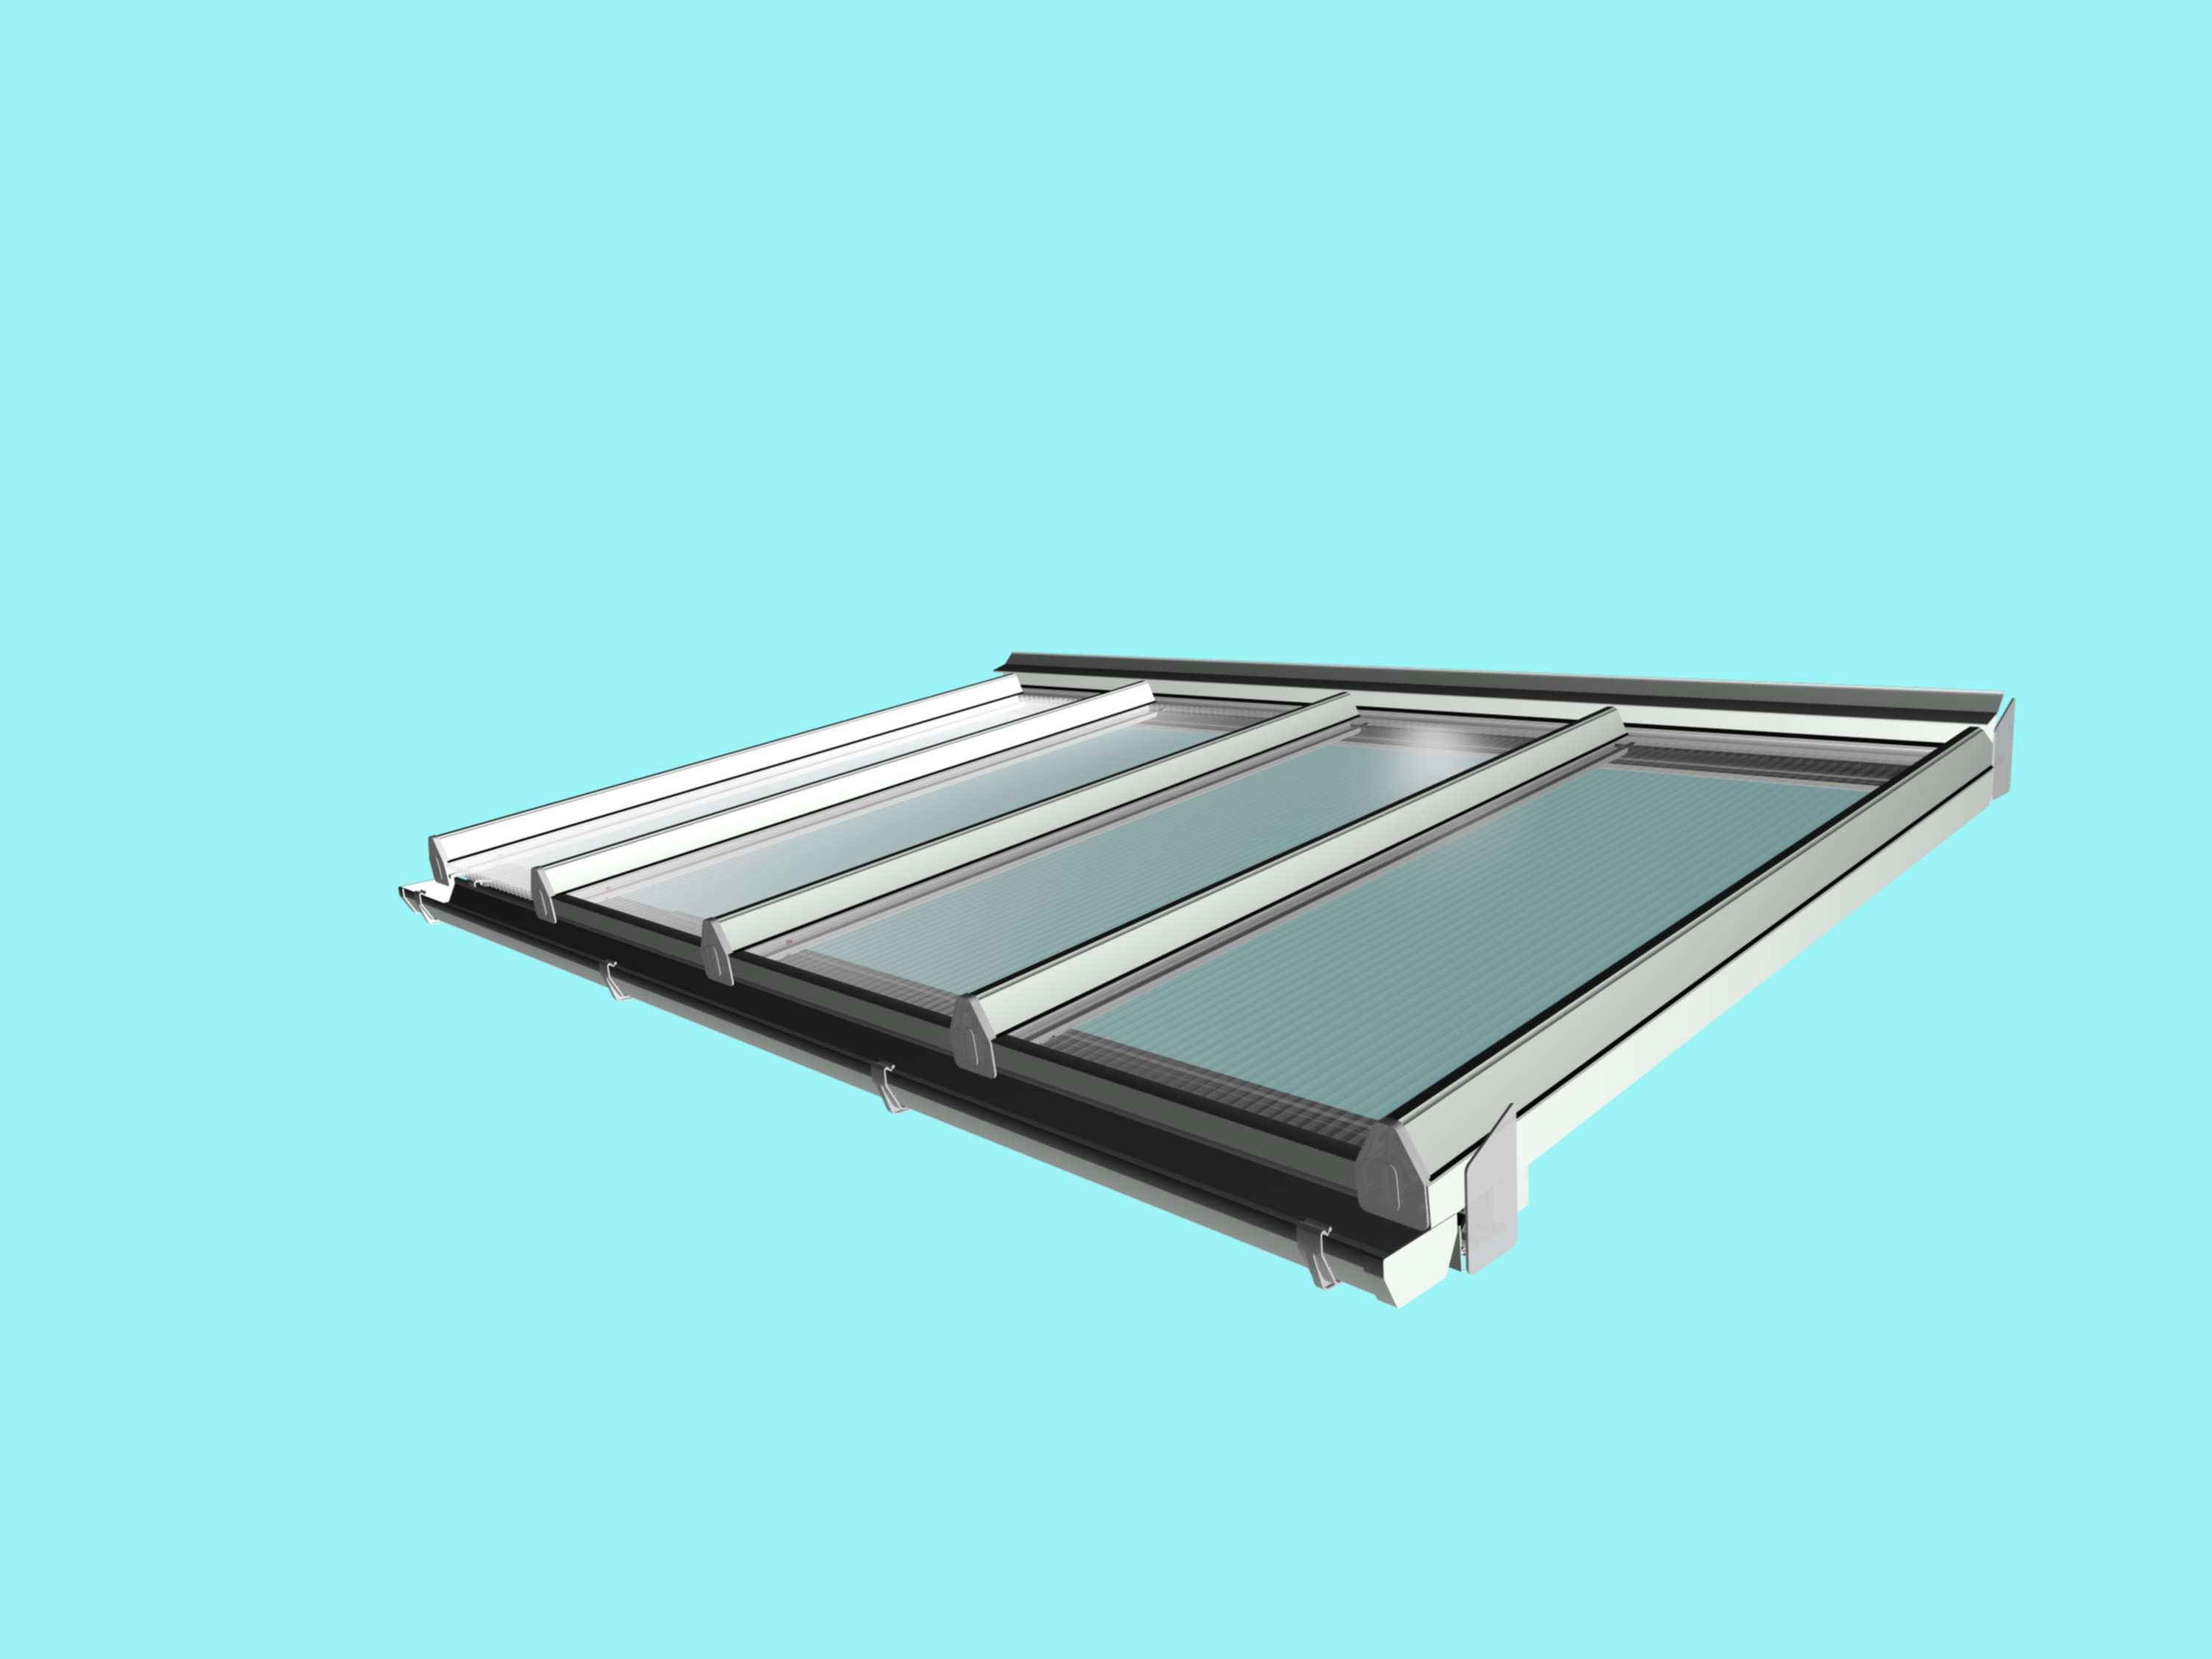 Self-Supporting DIY Conservatory Roof Kit for 16mm polycarbonate, 6.0m wide x 3.0m Projection from Omega Build